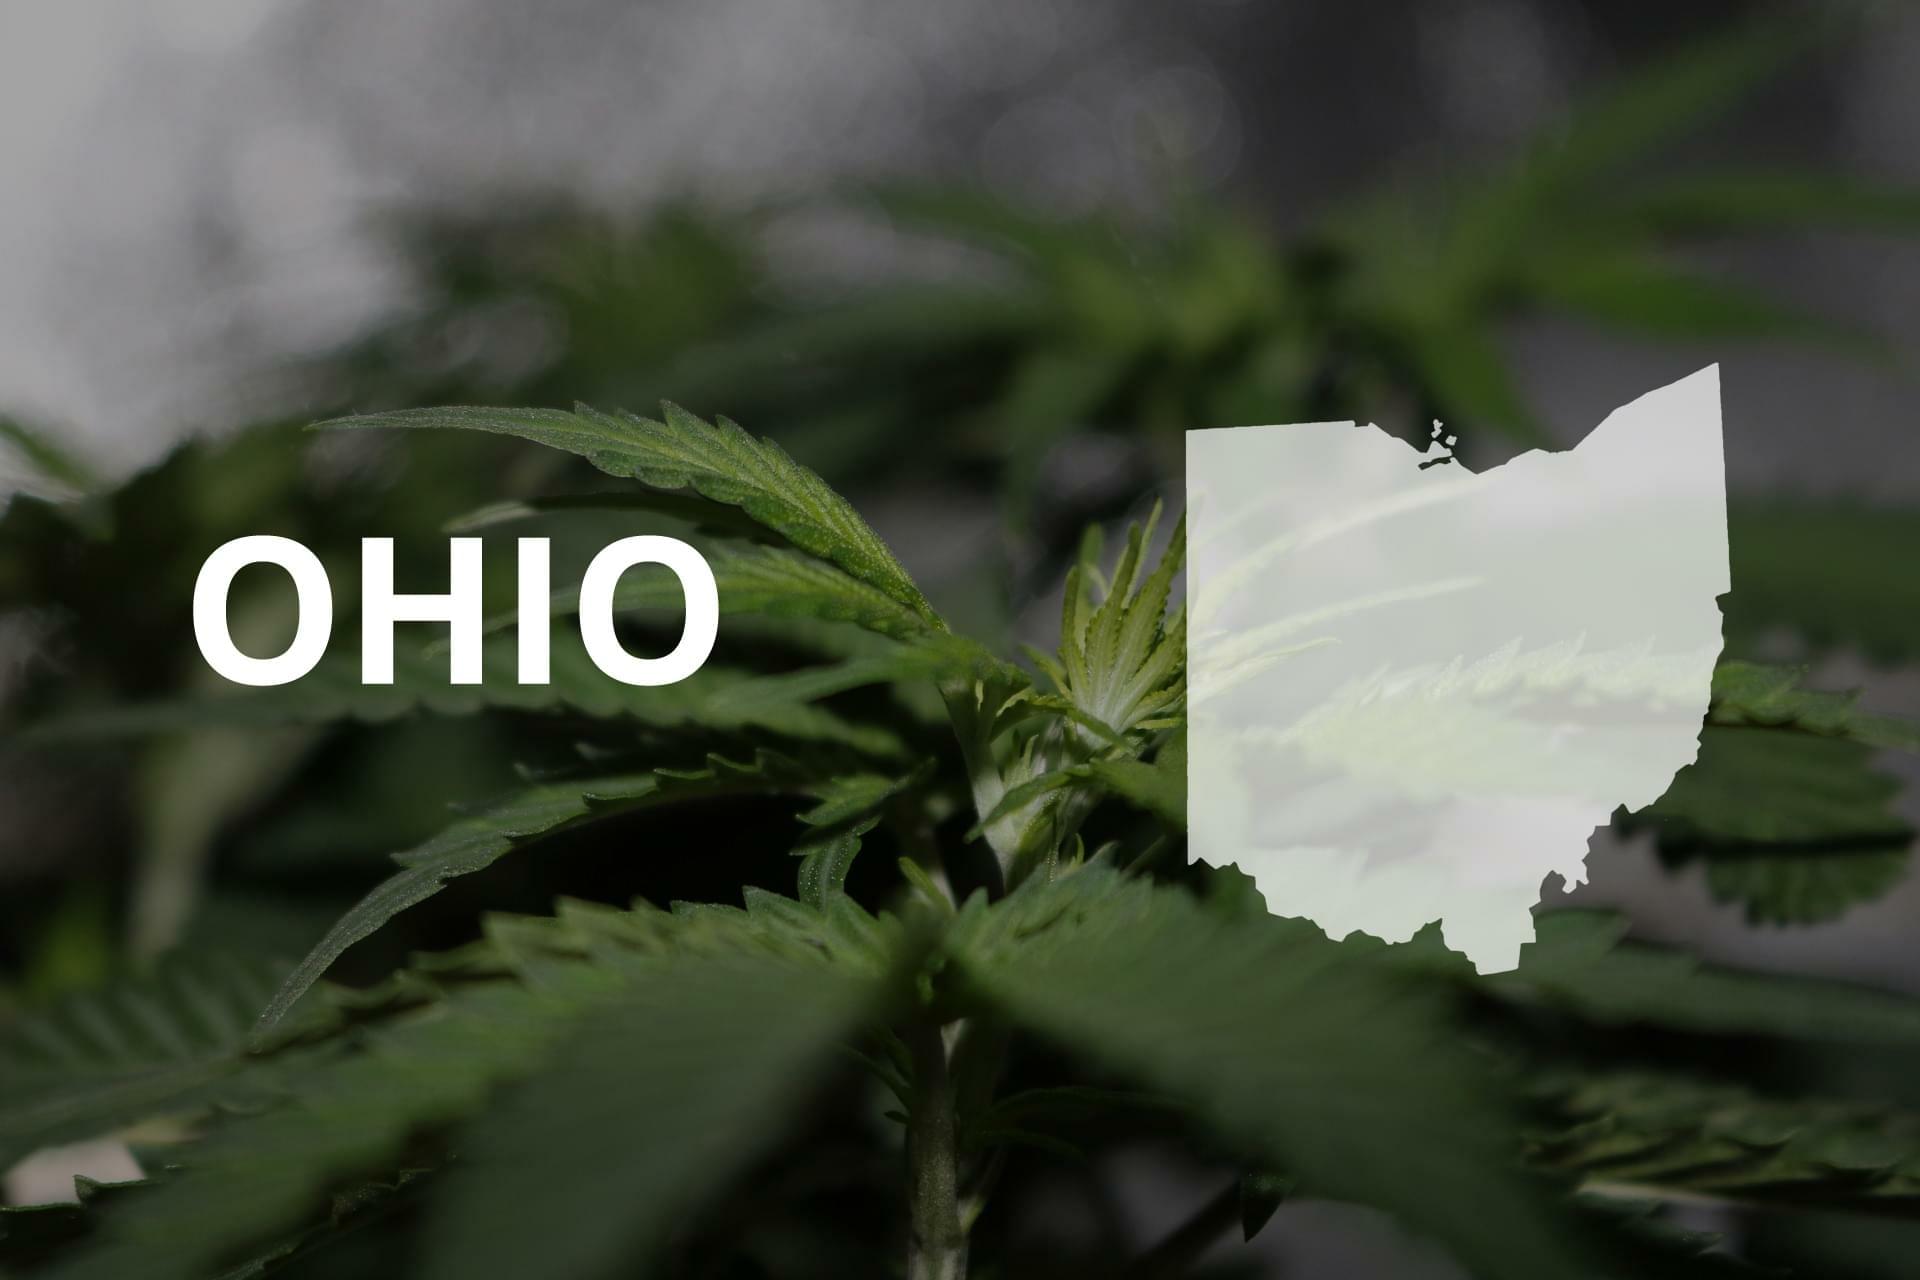 Ohio docs writing recs for patients to buy medical marijuana in Michigan before rules ...